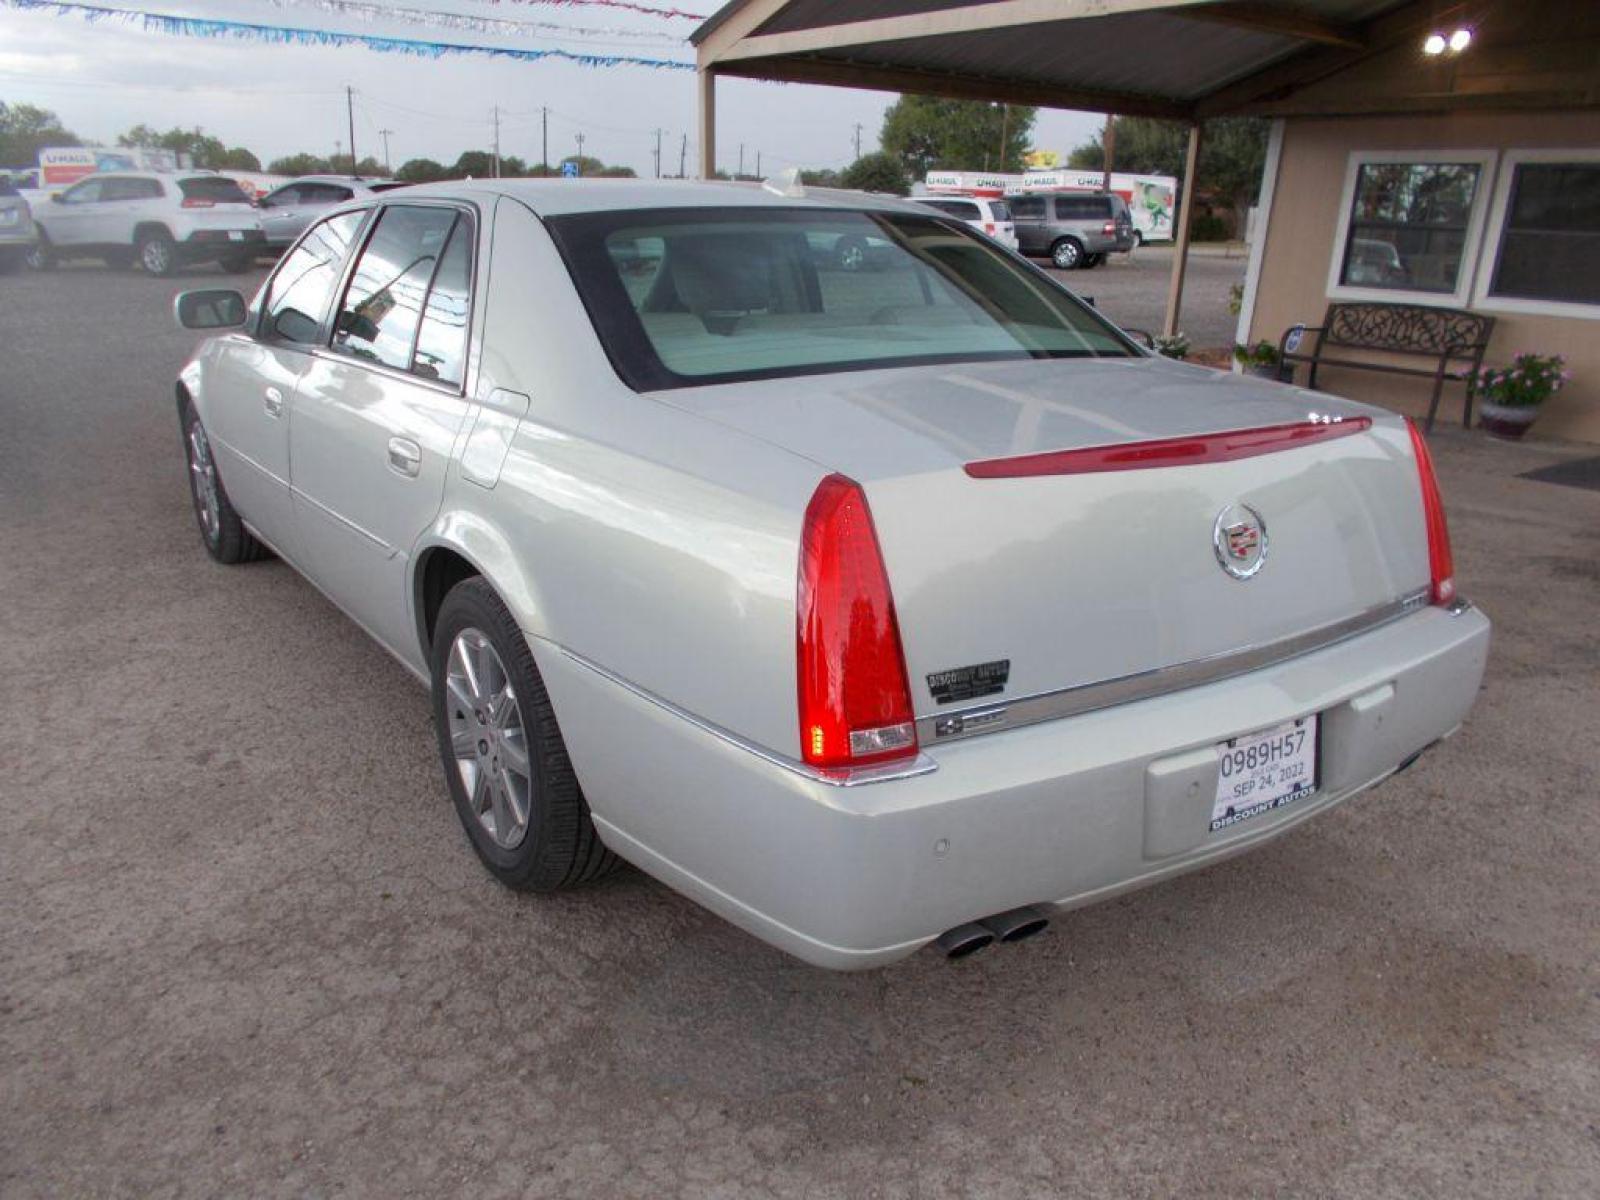 2010 WHITE CADILLAC DTS PREMIUM COLLECTION (1G6KH5EY4AU) with an 4.6L engine, Automatic transmission - www.discountautosinc.com TEXT QUESTIONS TO 210-900-3118 35 MONTHLY PAYMENTS OF $320 WITH $1895 DOWN AND FINAL ODD PAYMENT OF $72.79 W/FIRST PAYMENT DUE 30 DAYS FROM DATE OF SALE. ** NO WARRANTY, SOLD AS IS ** 36 MO'S TERM W/ 22.43 APR and DEF DOWN OF $220 DUE TWO WEEKS A - Photo #2